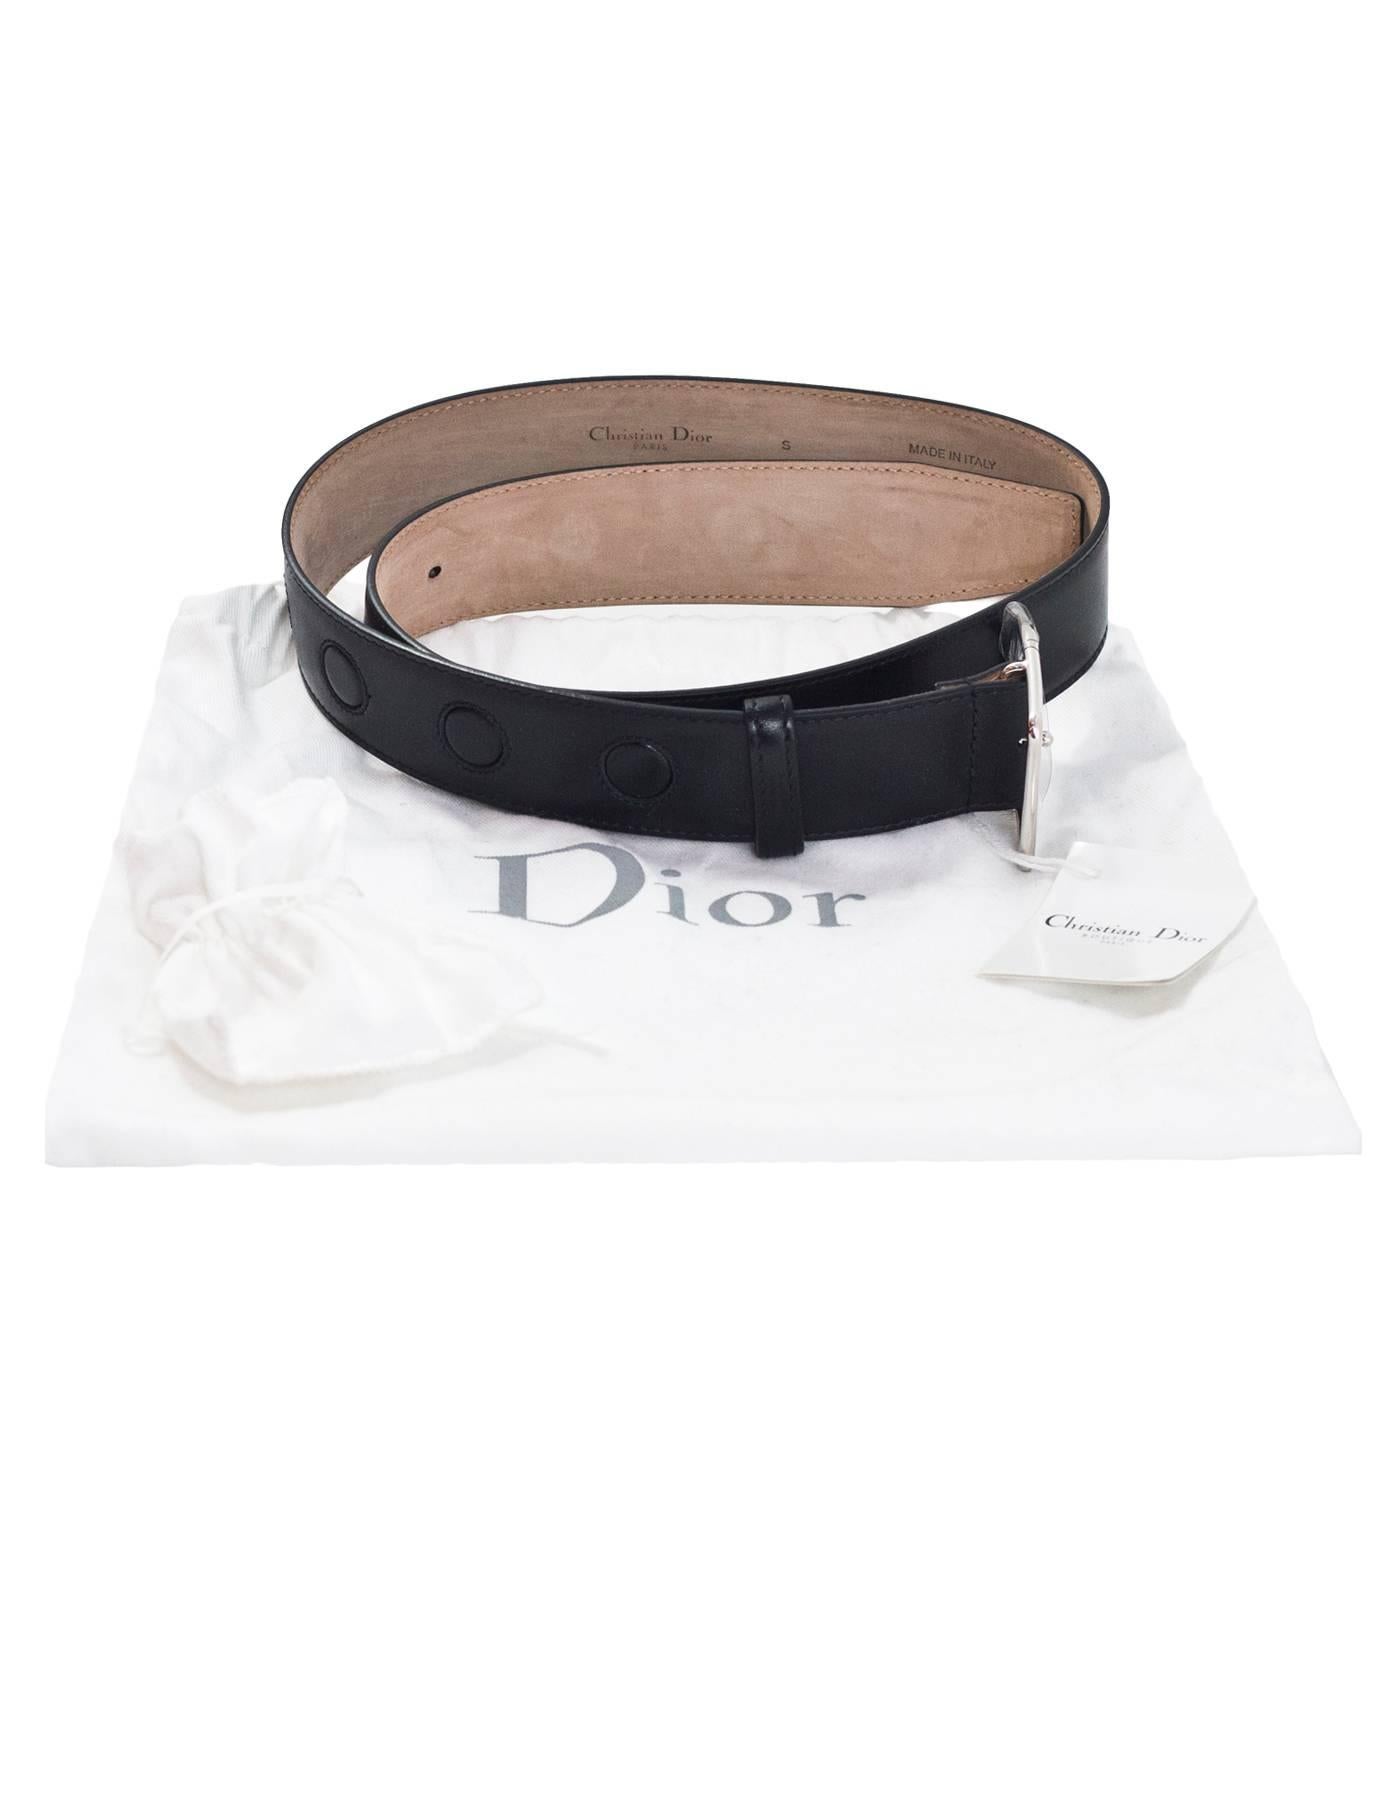 Christian Dior '17 Black Leather 35mm Belt with D Buckle Sz Small NEW with DB 1